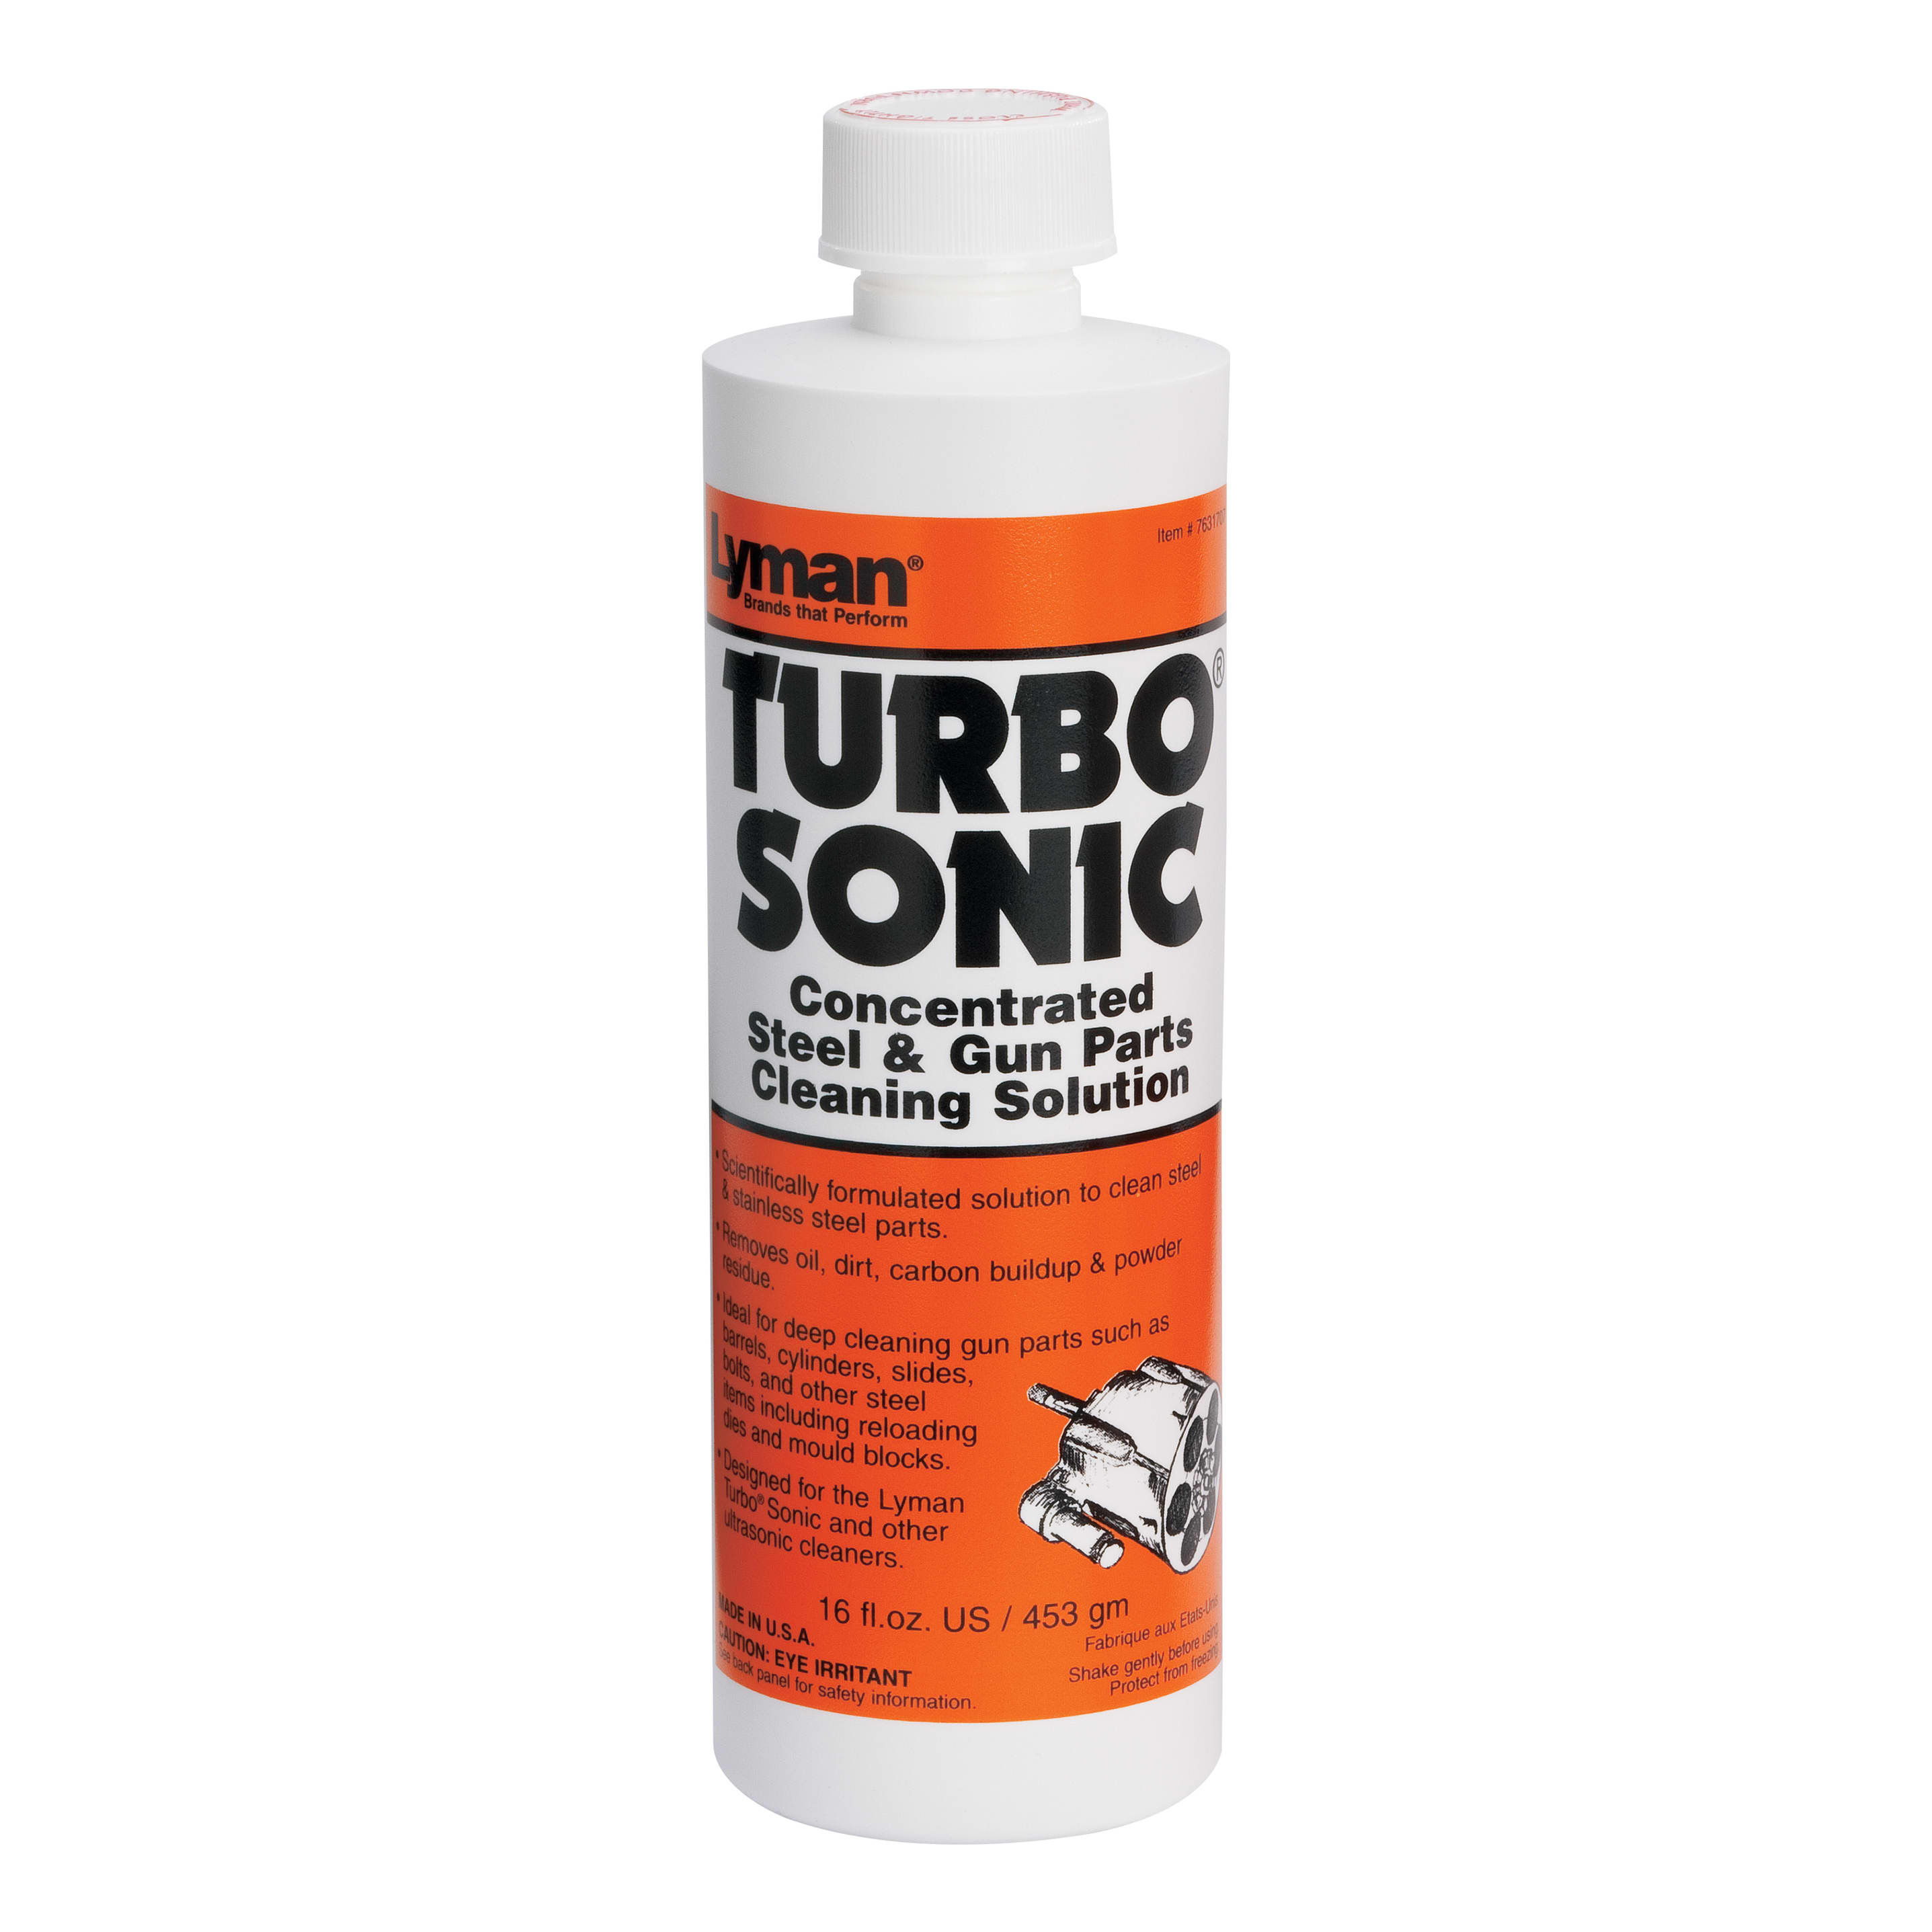 Lyman Turbo Sonic Steel and Gun Parts Cleaning Solution – 16 oz.